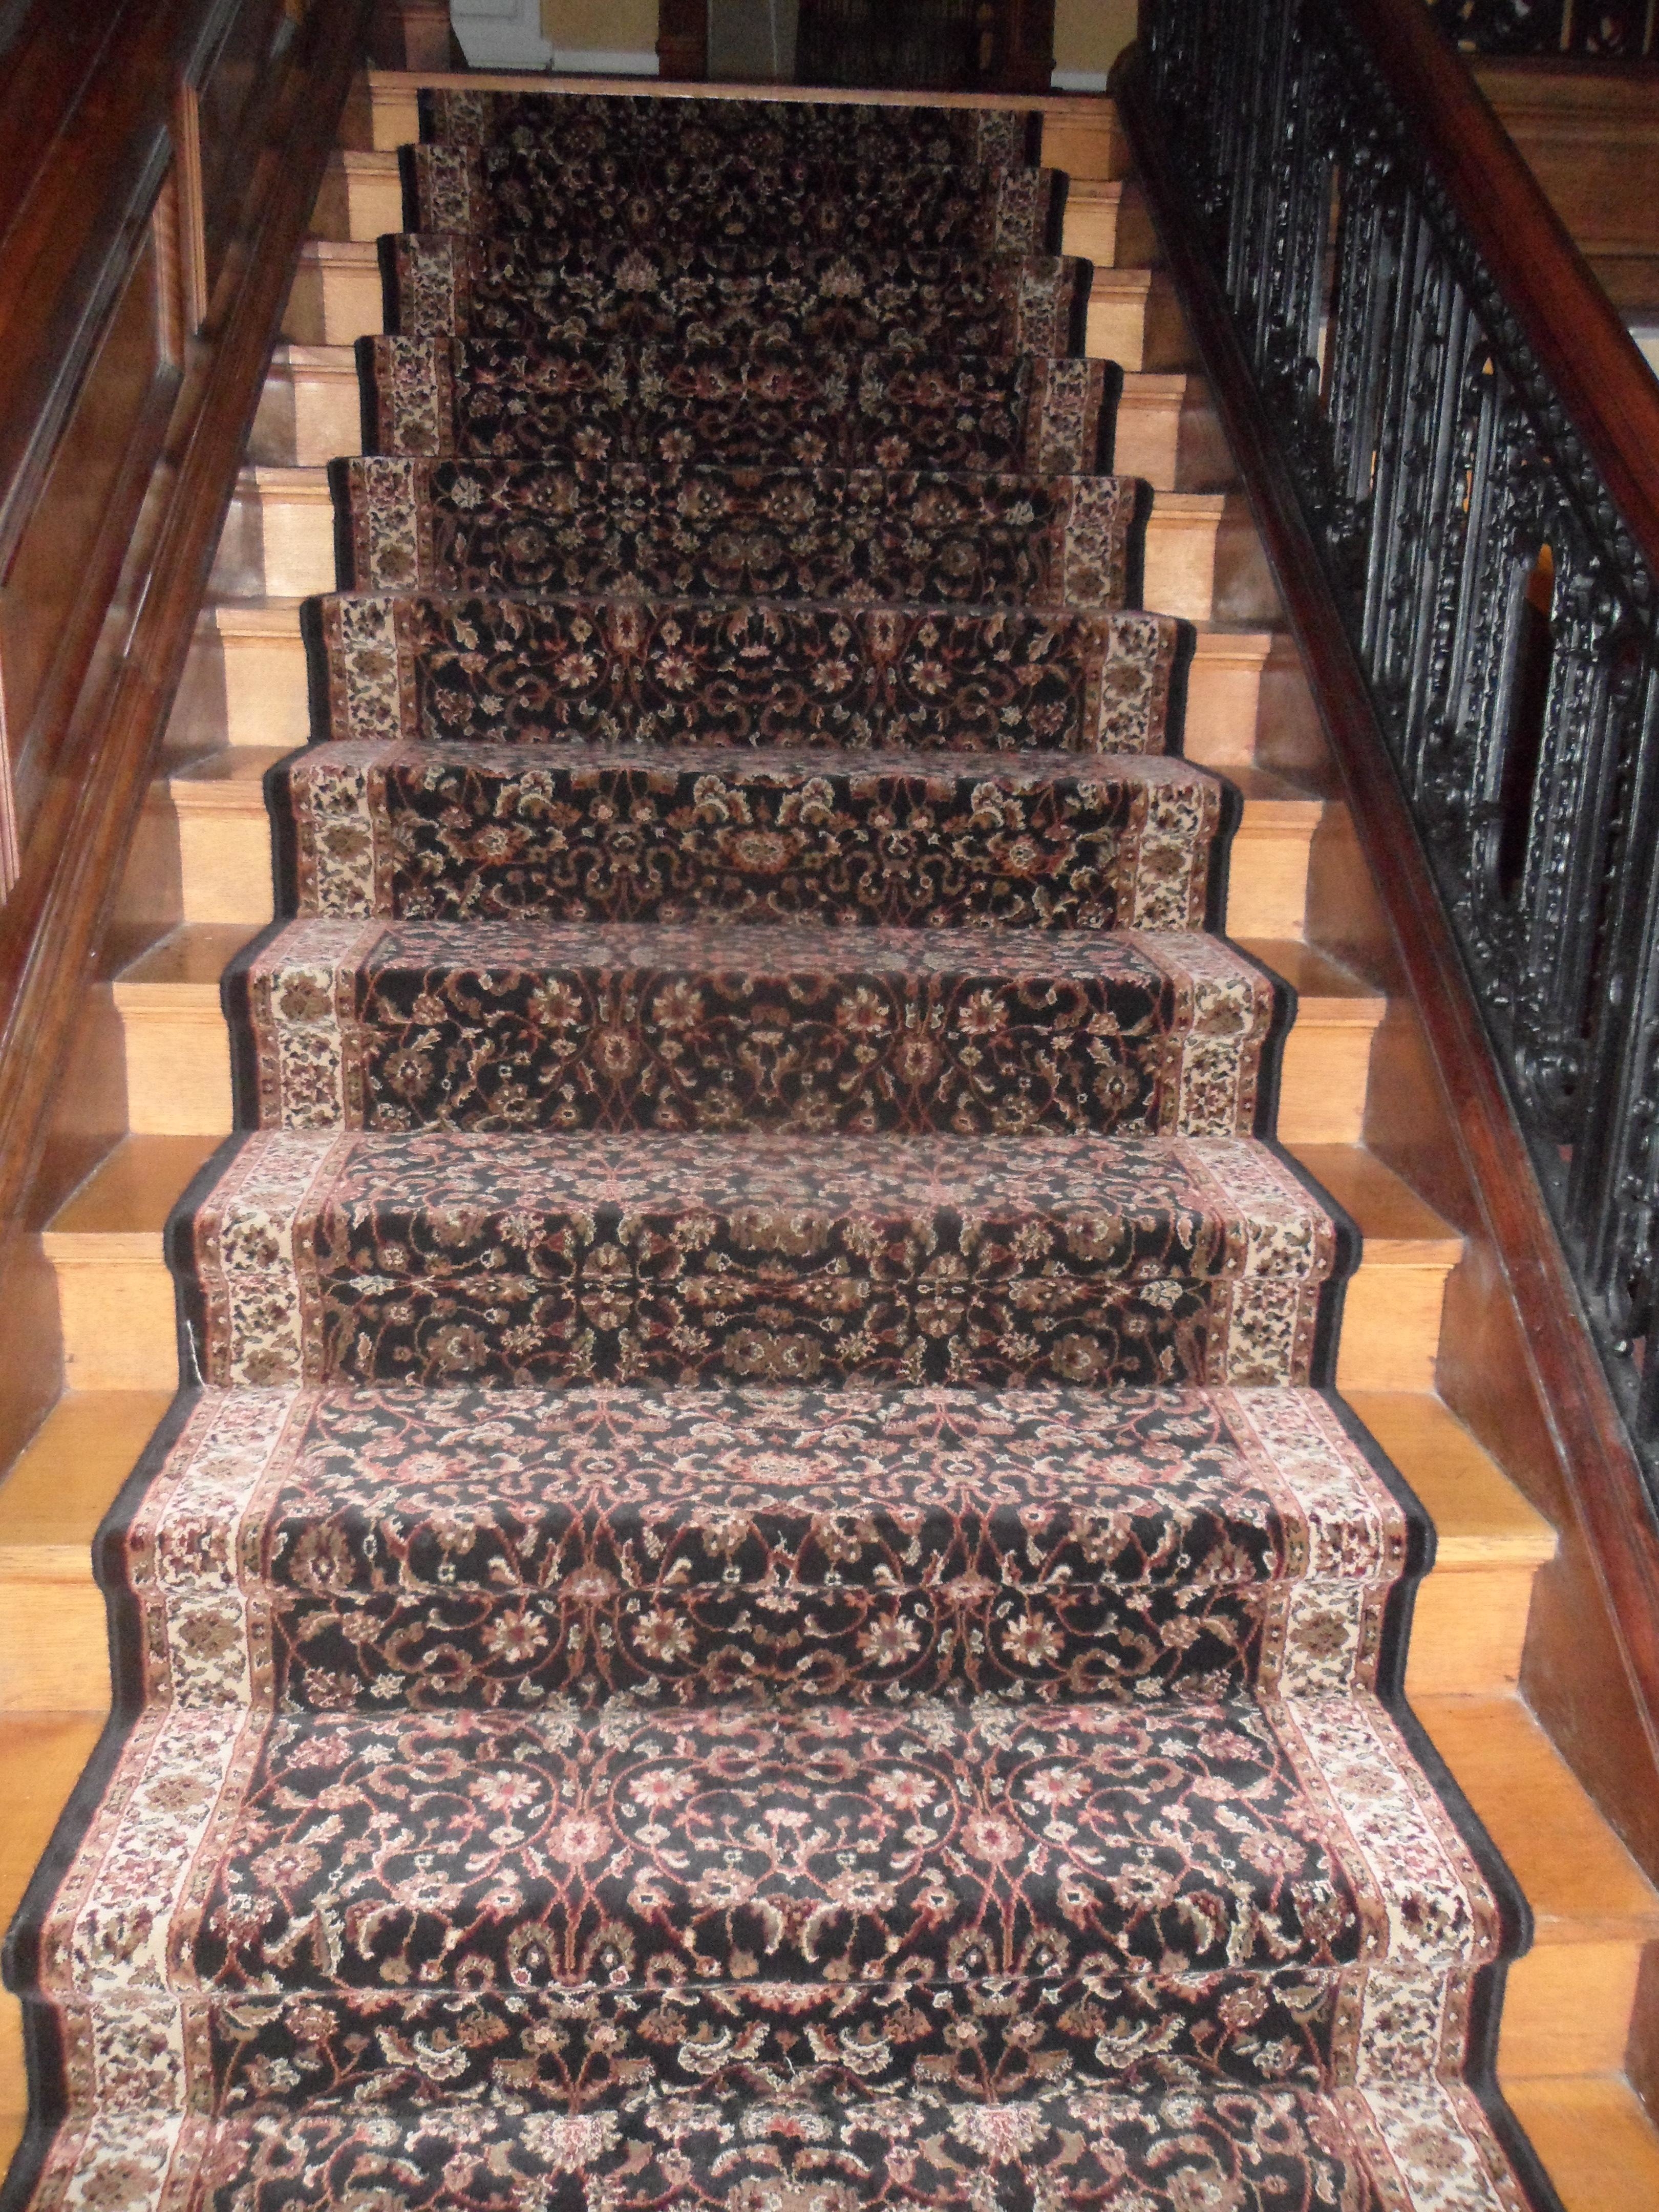 We also do stair runners!